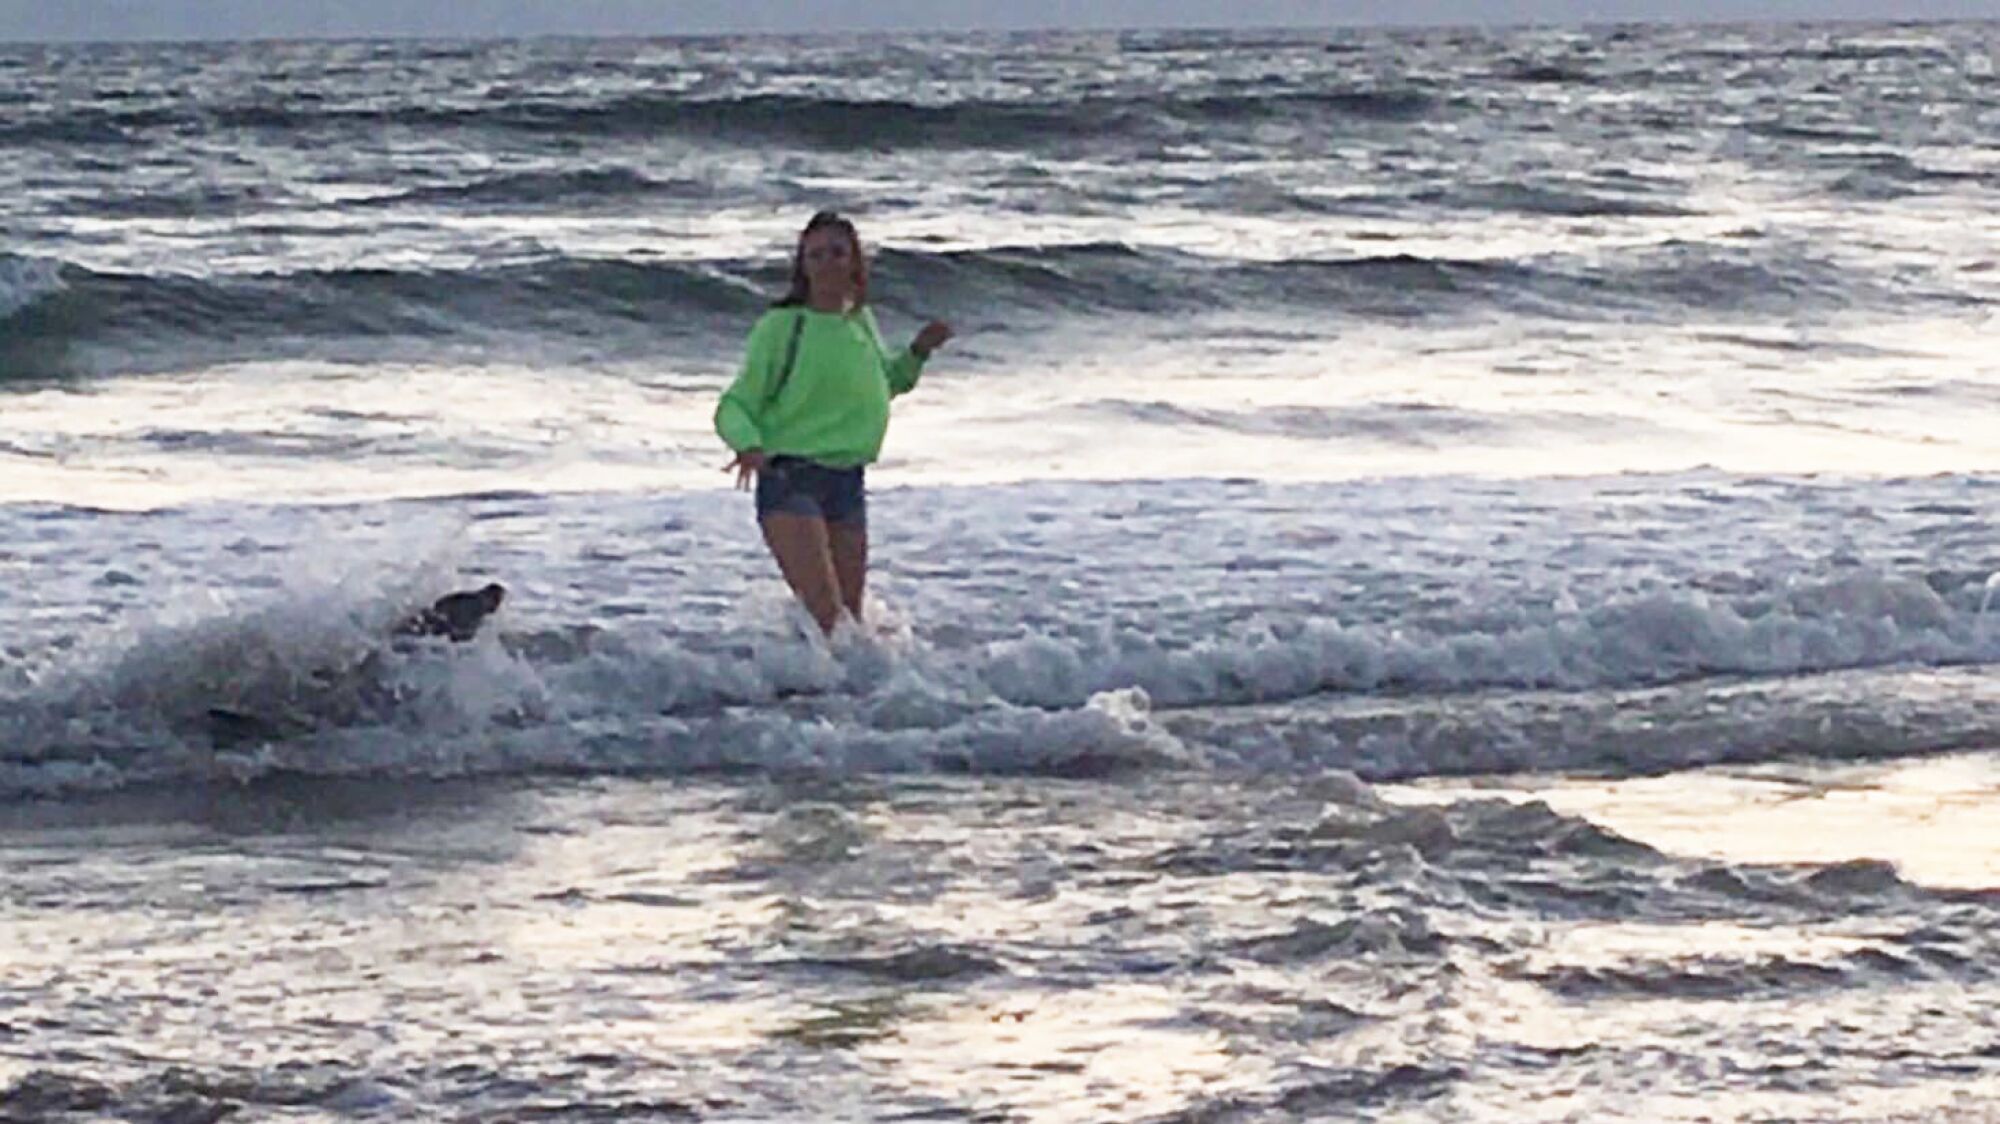 Megan Pagnini, just before she was bitten by a sea lion, left, in the surf at Pismo Beach.